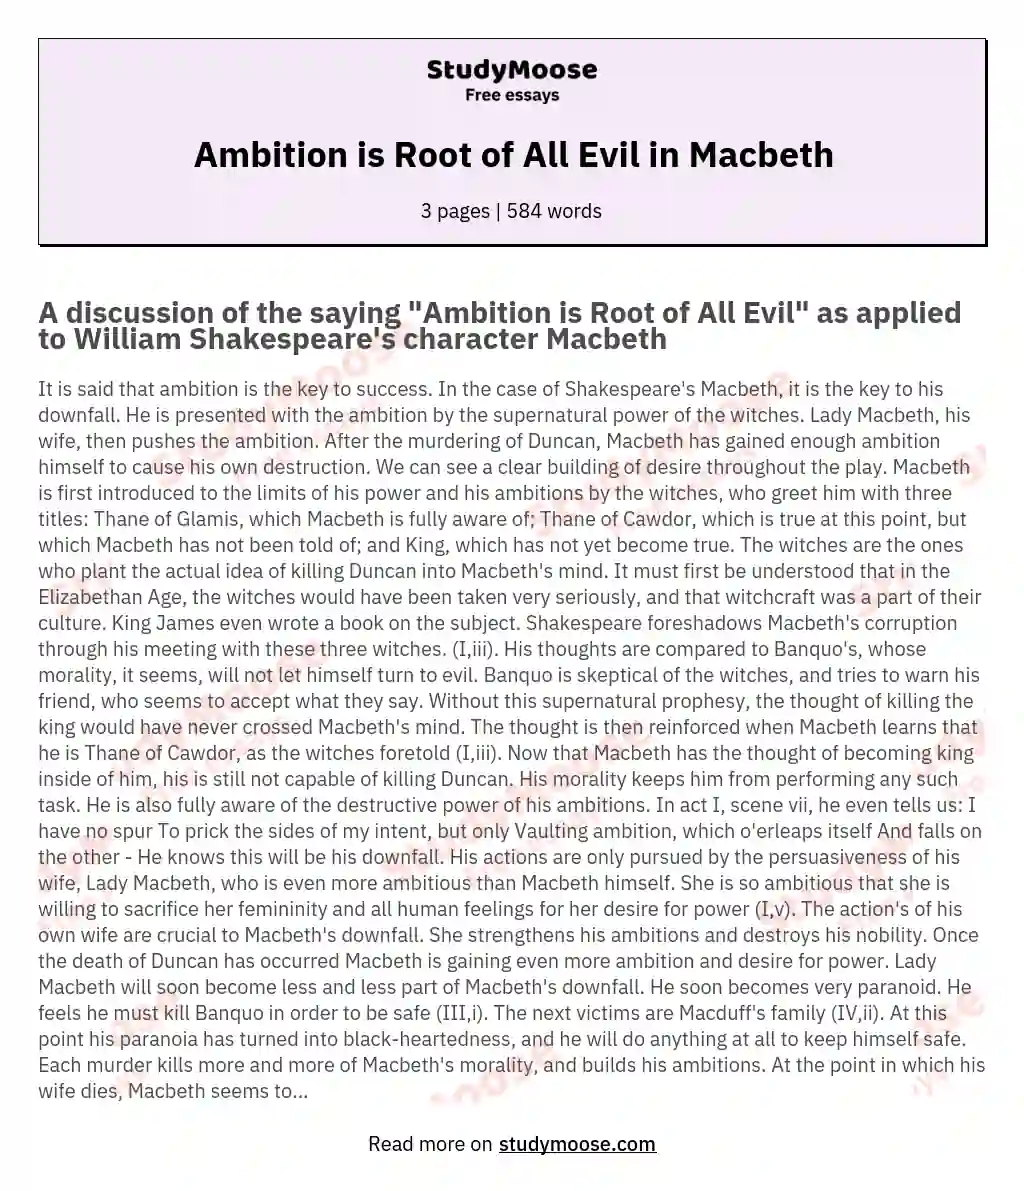 Ambition is Root of All Evil in Macbeth essay